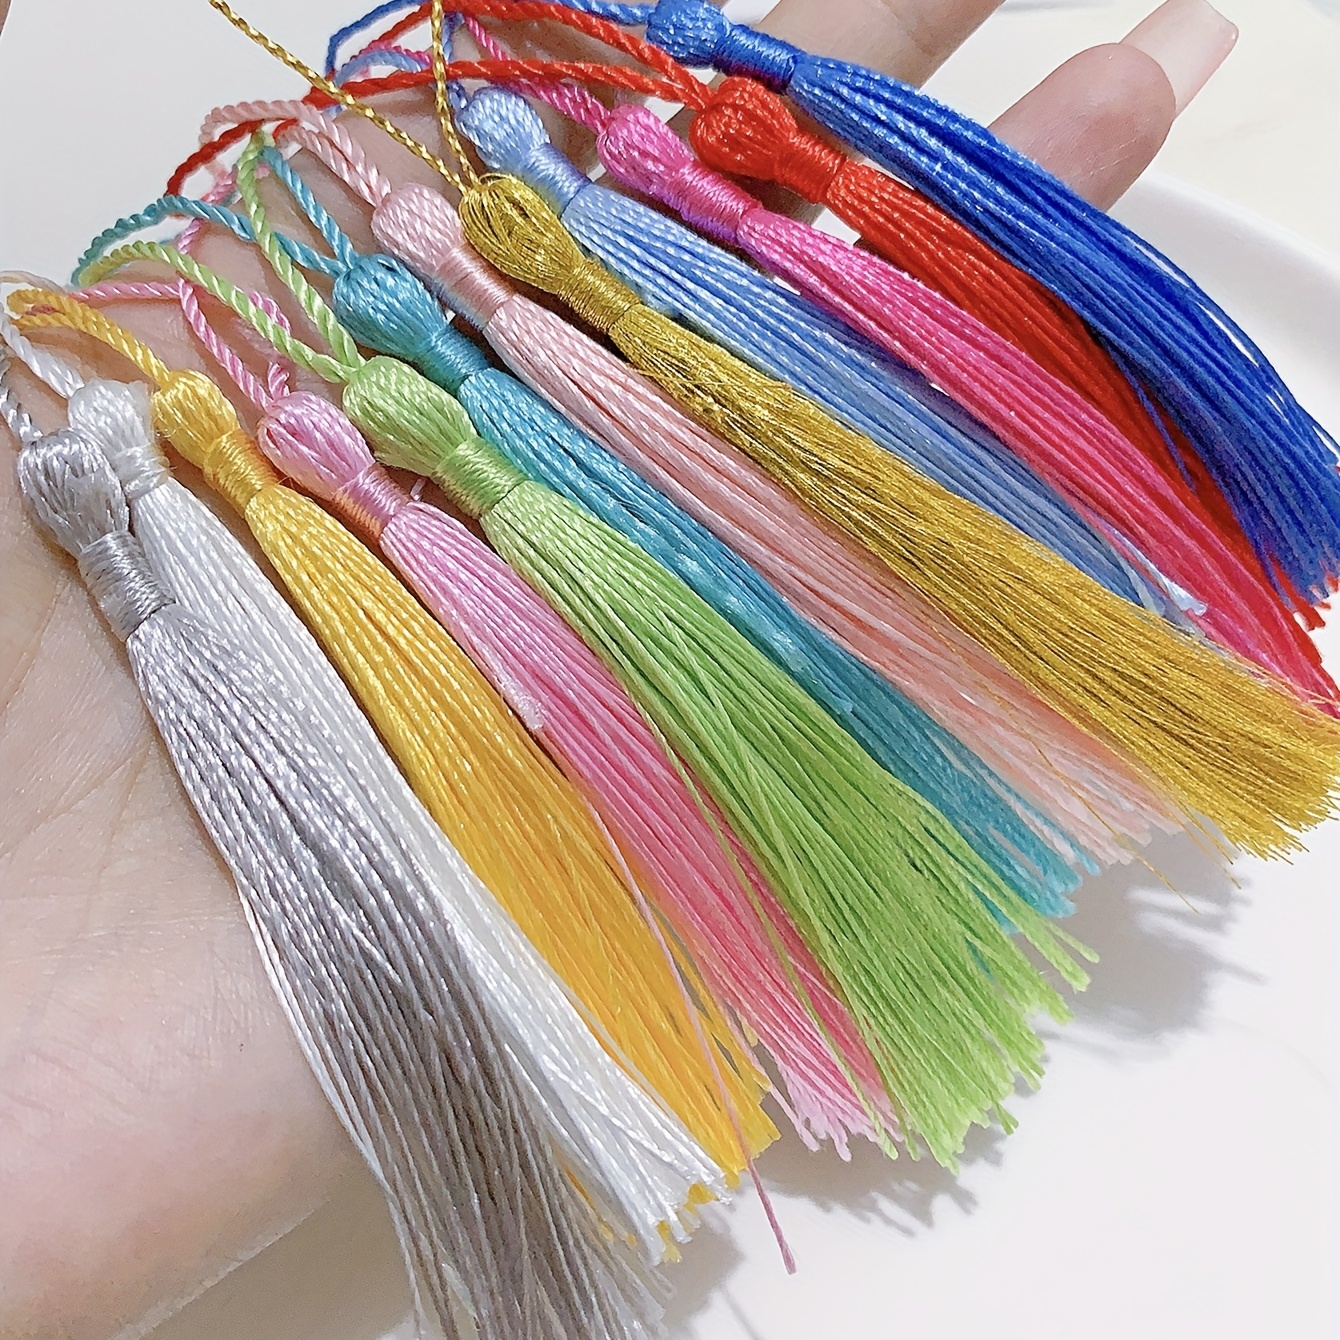 20pcs Black And Mixed Tassels For Jewelry Making, Leather Tassel Keychain  Charms Bulk Acrylic Key Chain Blanks And Craft Supplies